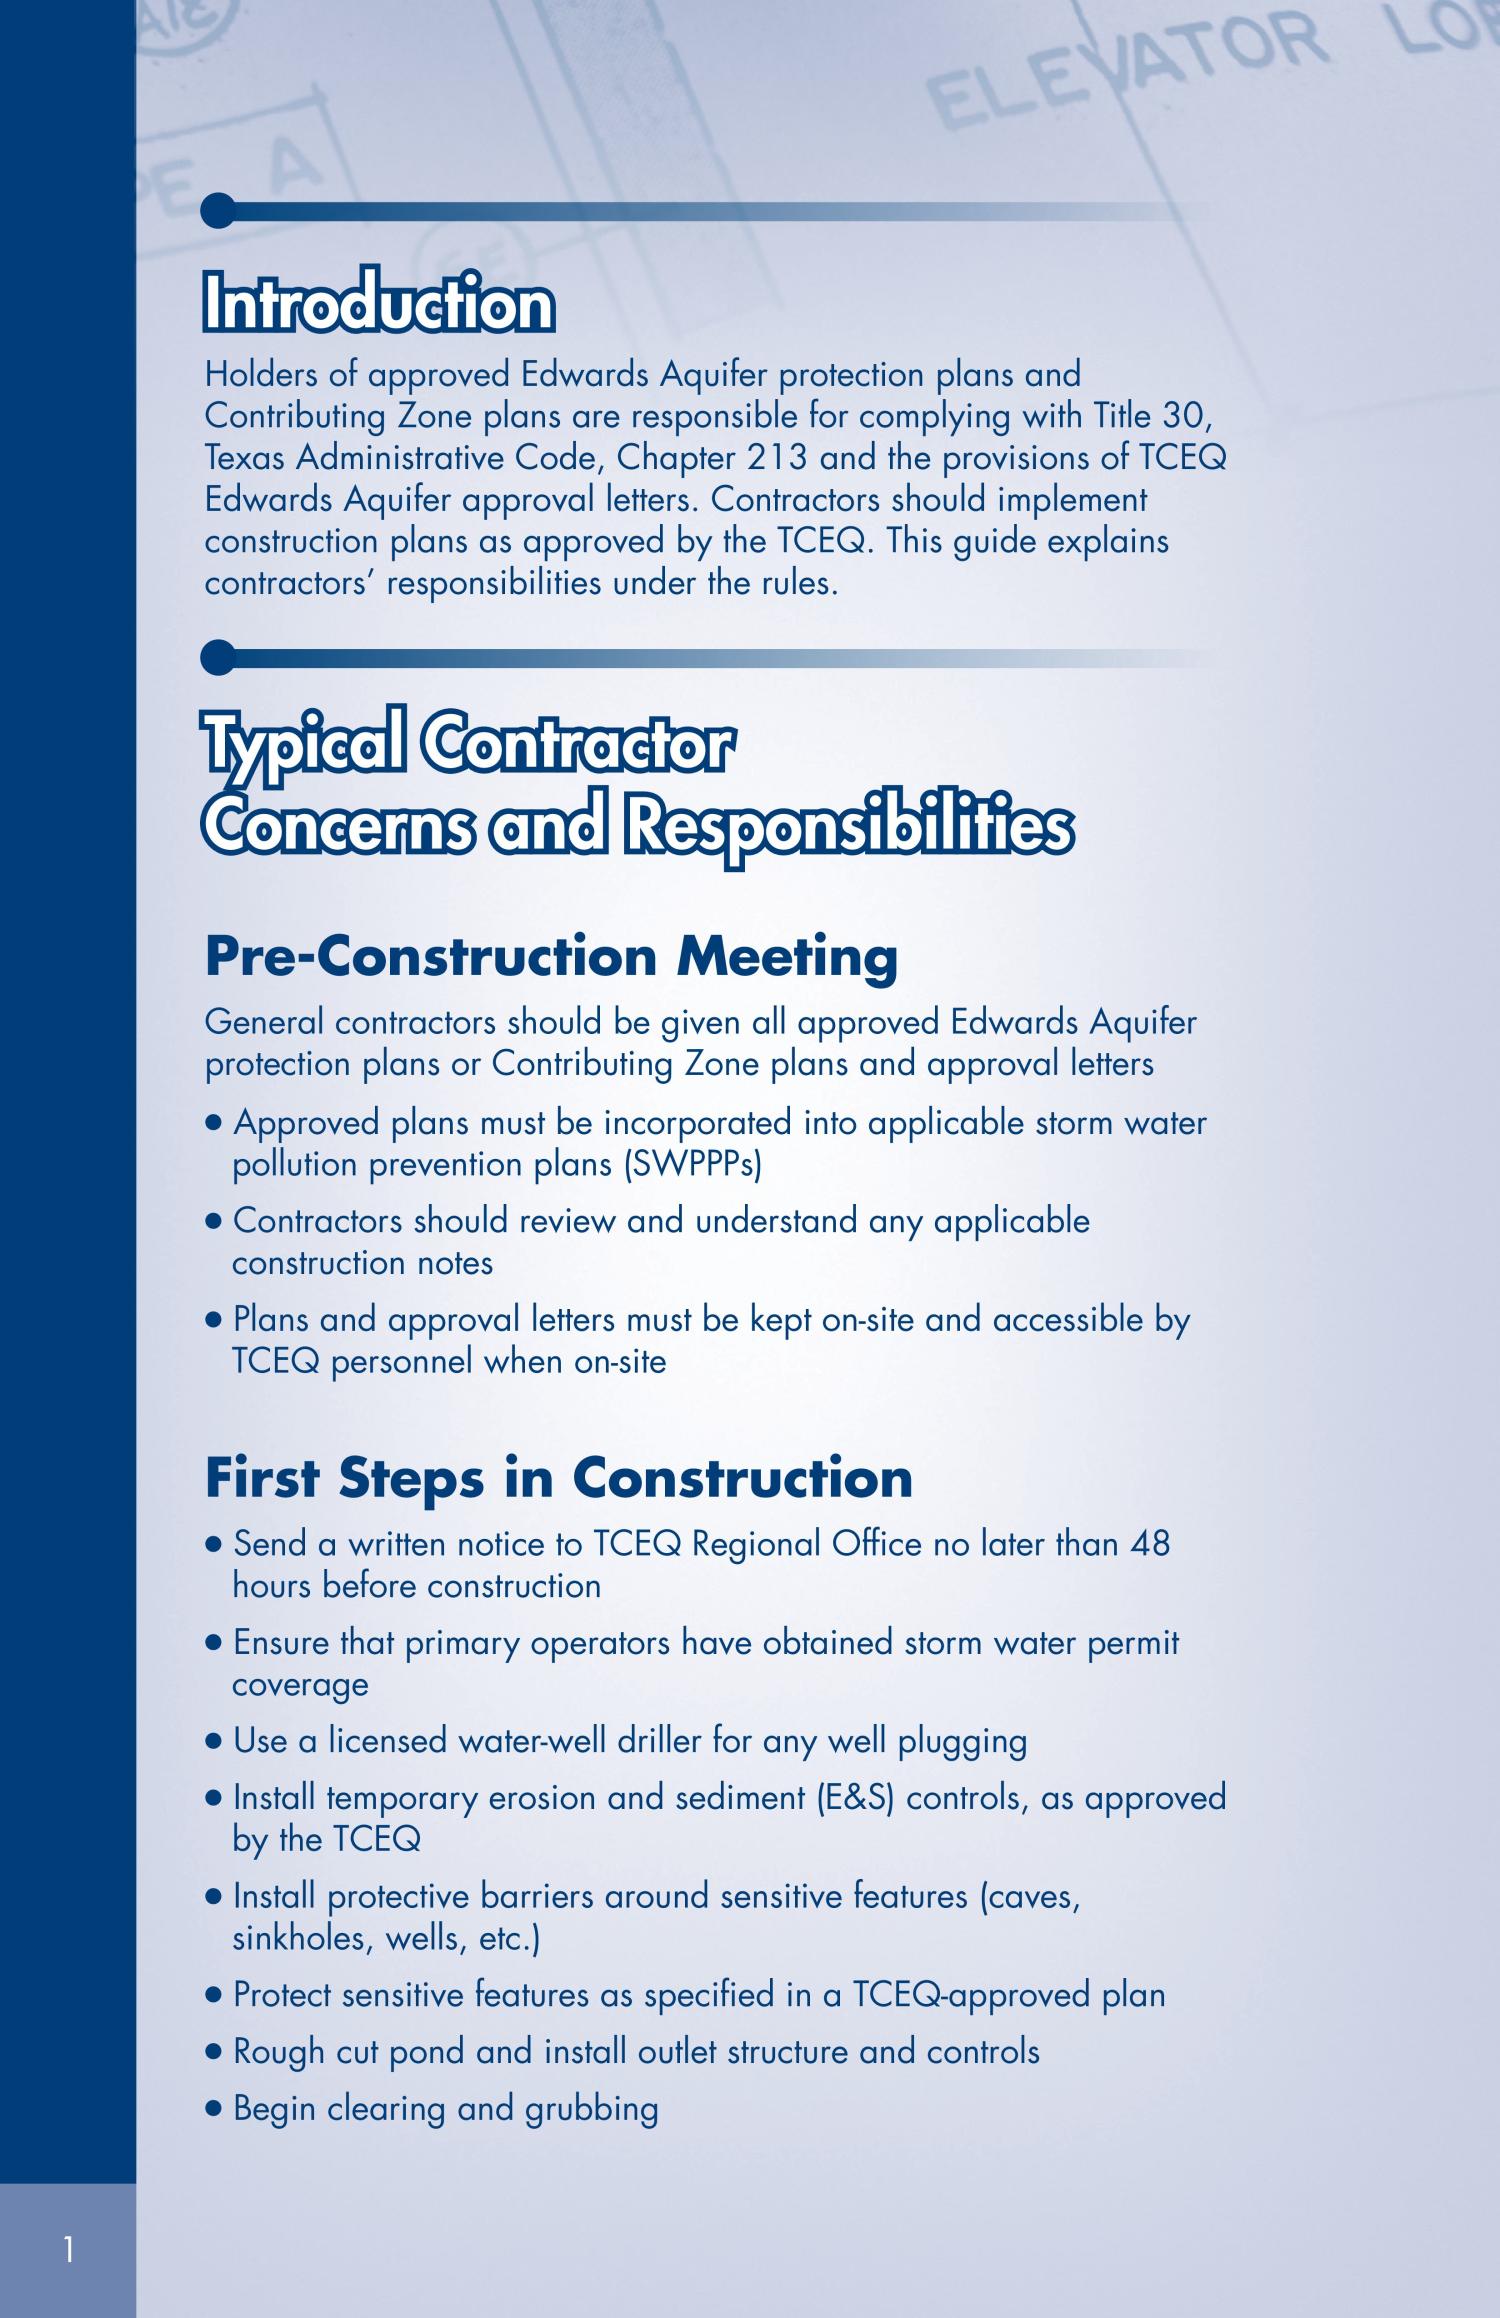 Edwards Aquifer Protection Program Contractor's Guide
                                                
                                                    1
                                                